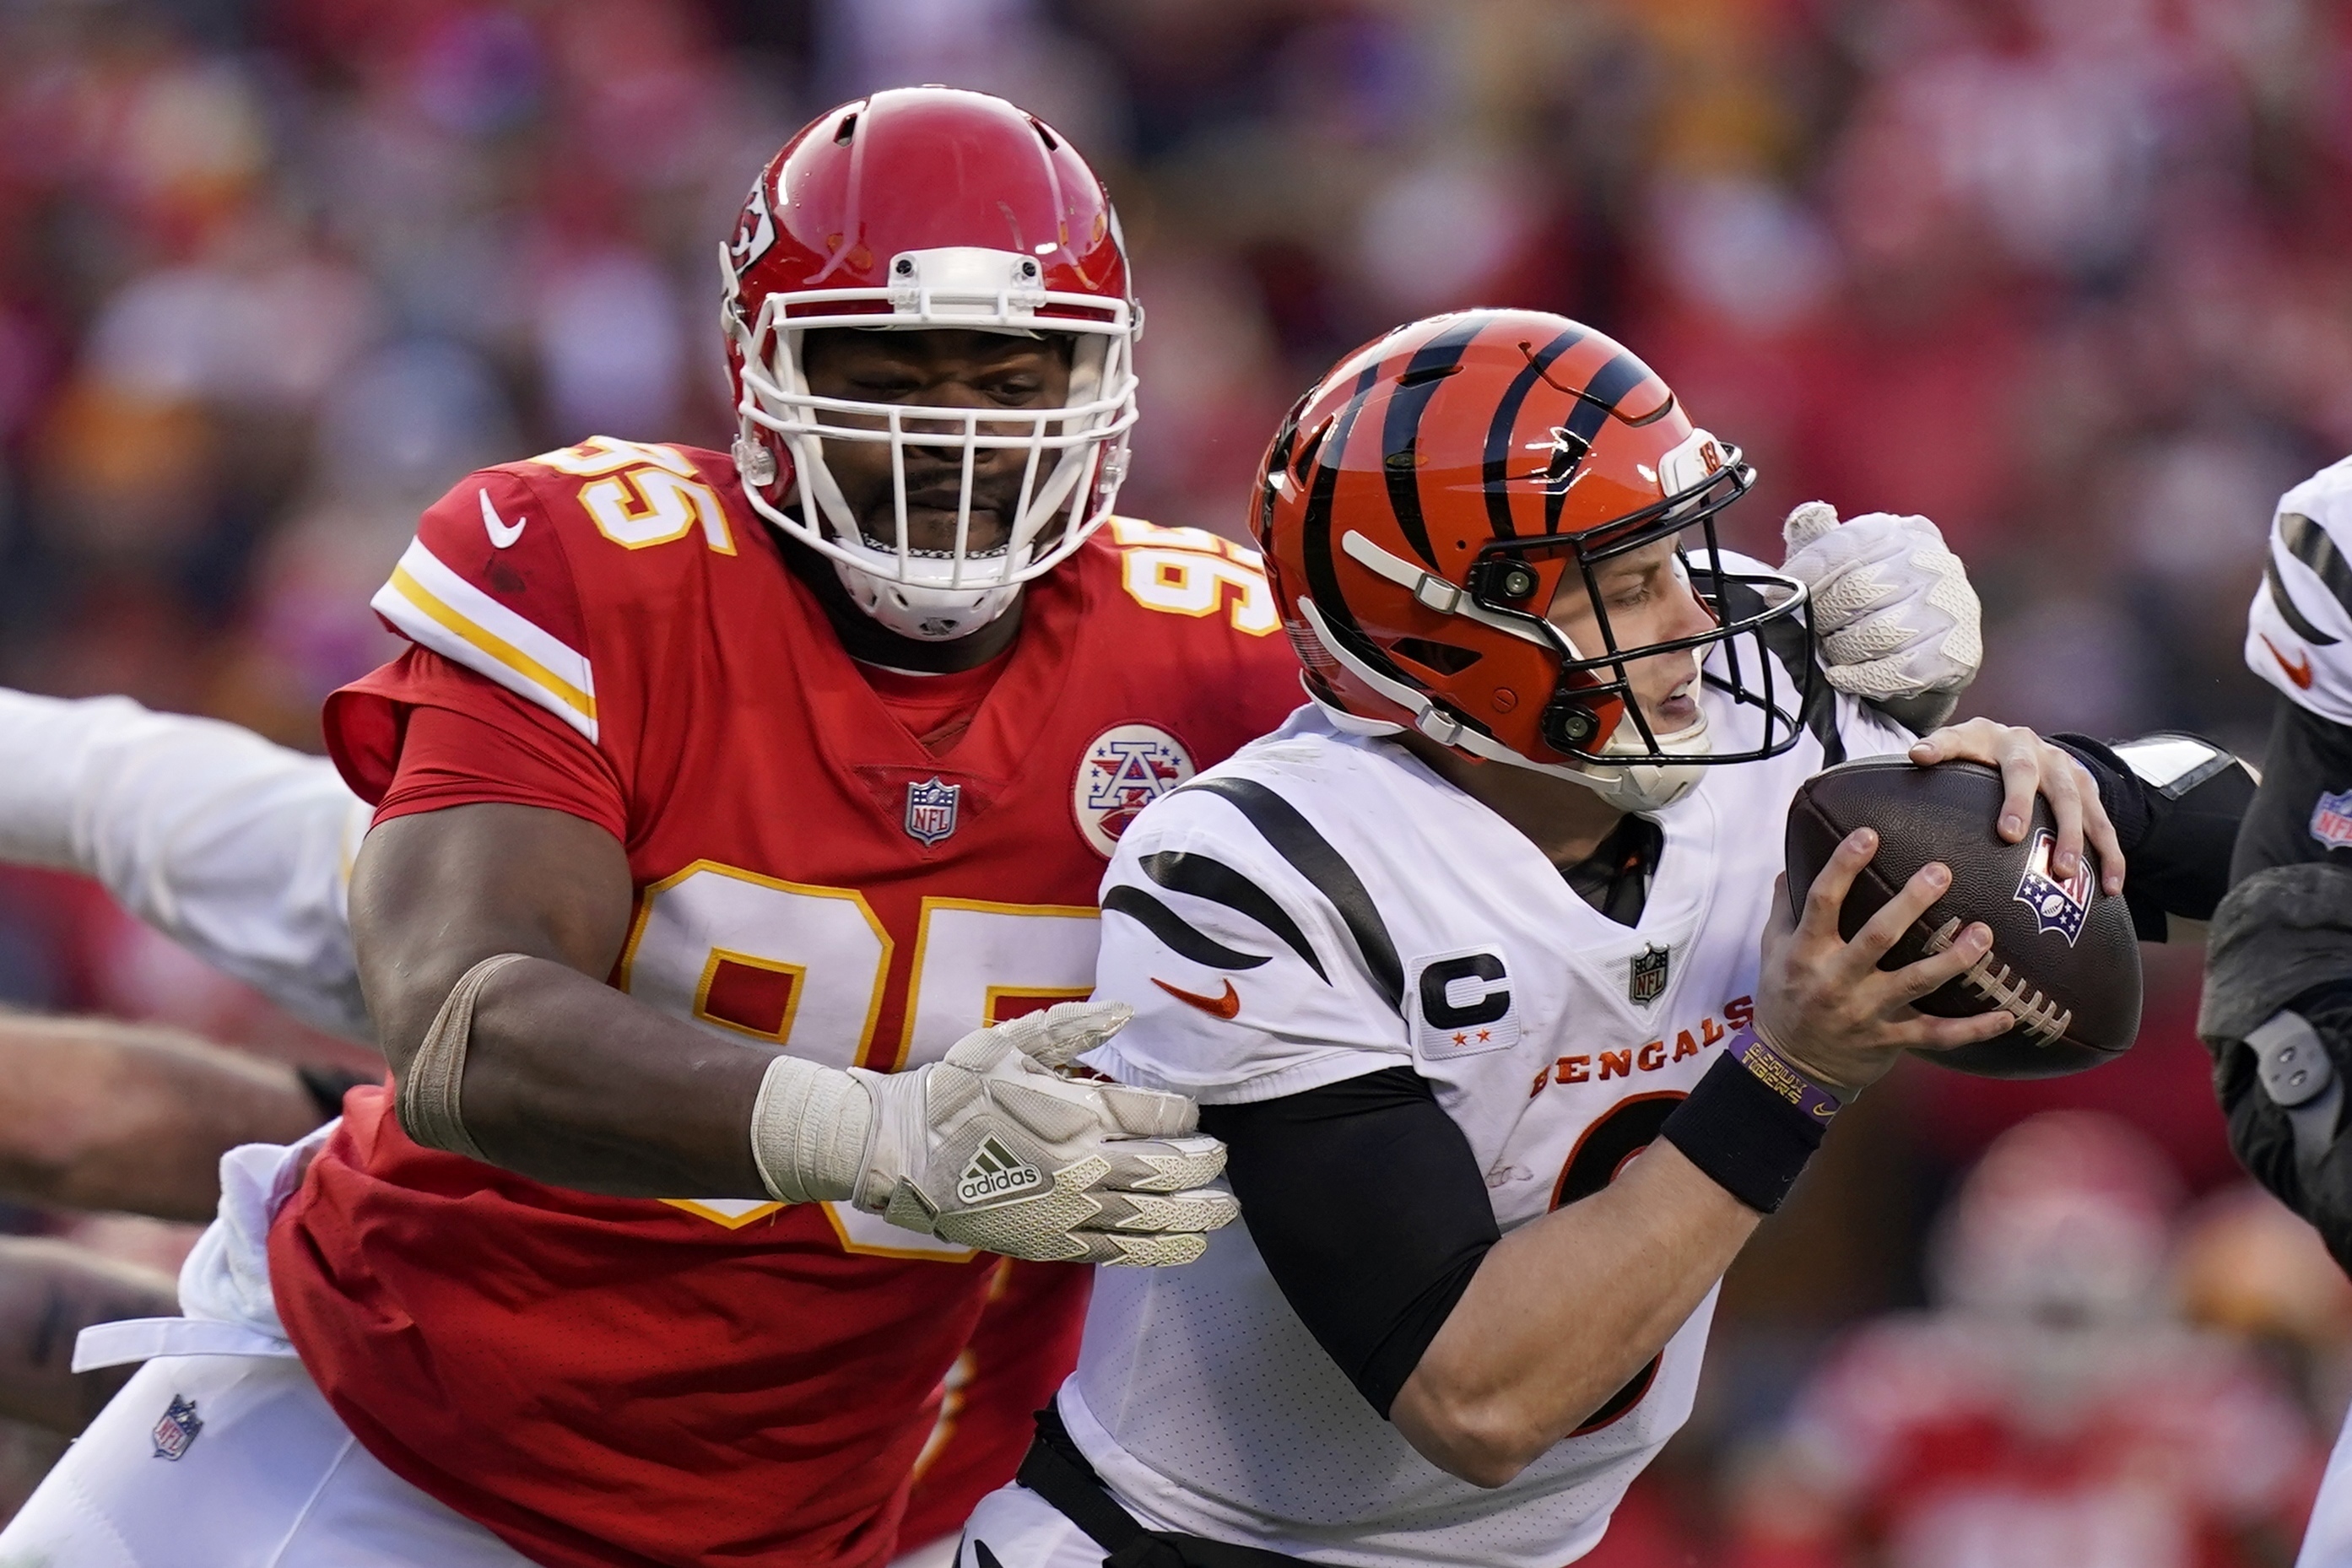 Bengals edge Chiefs in AFC Championship, punch ticket to Super Bowl LVI